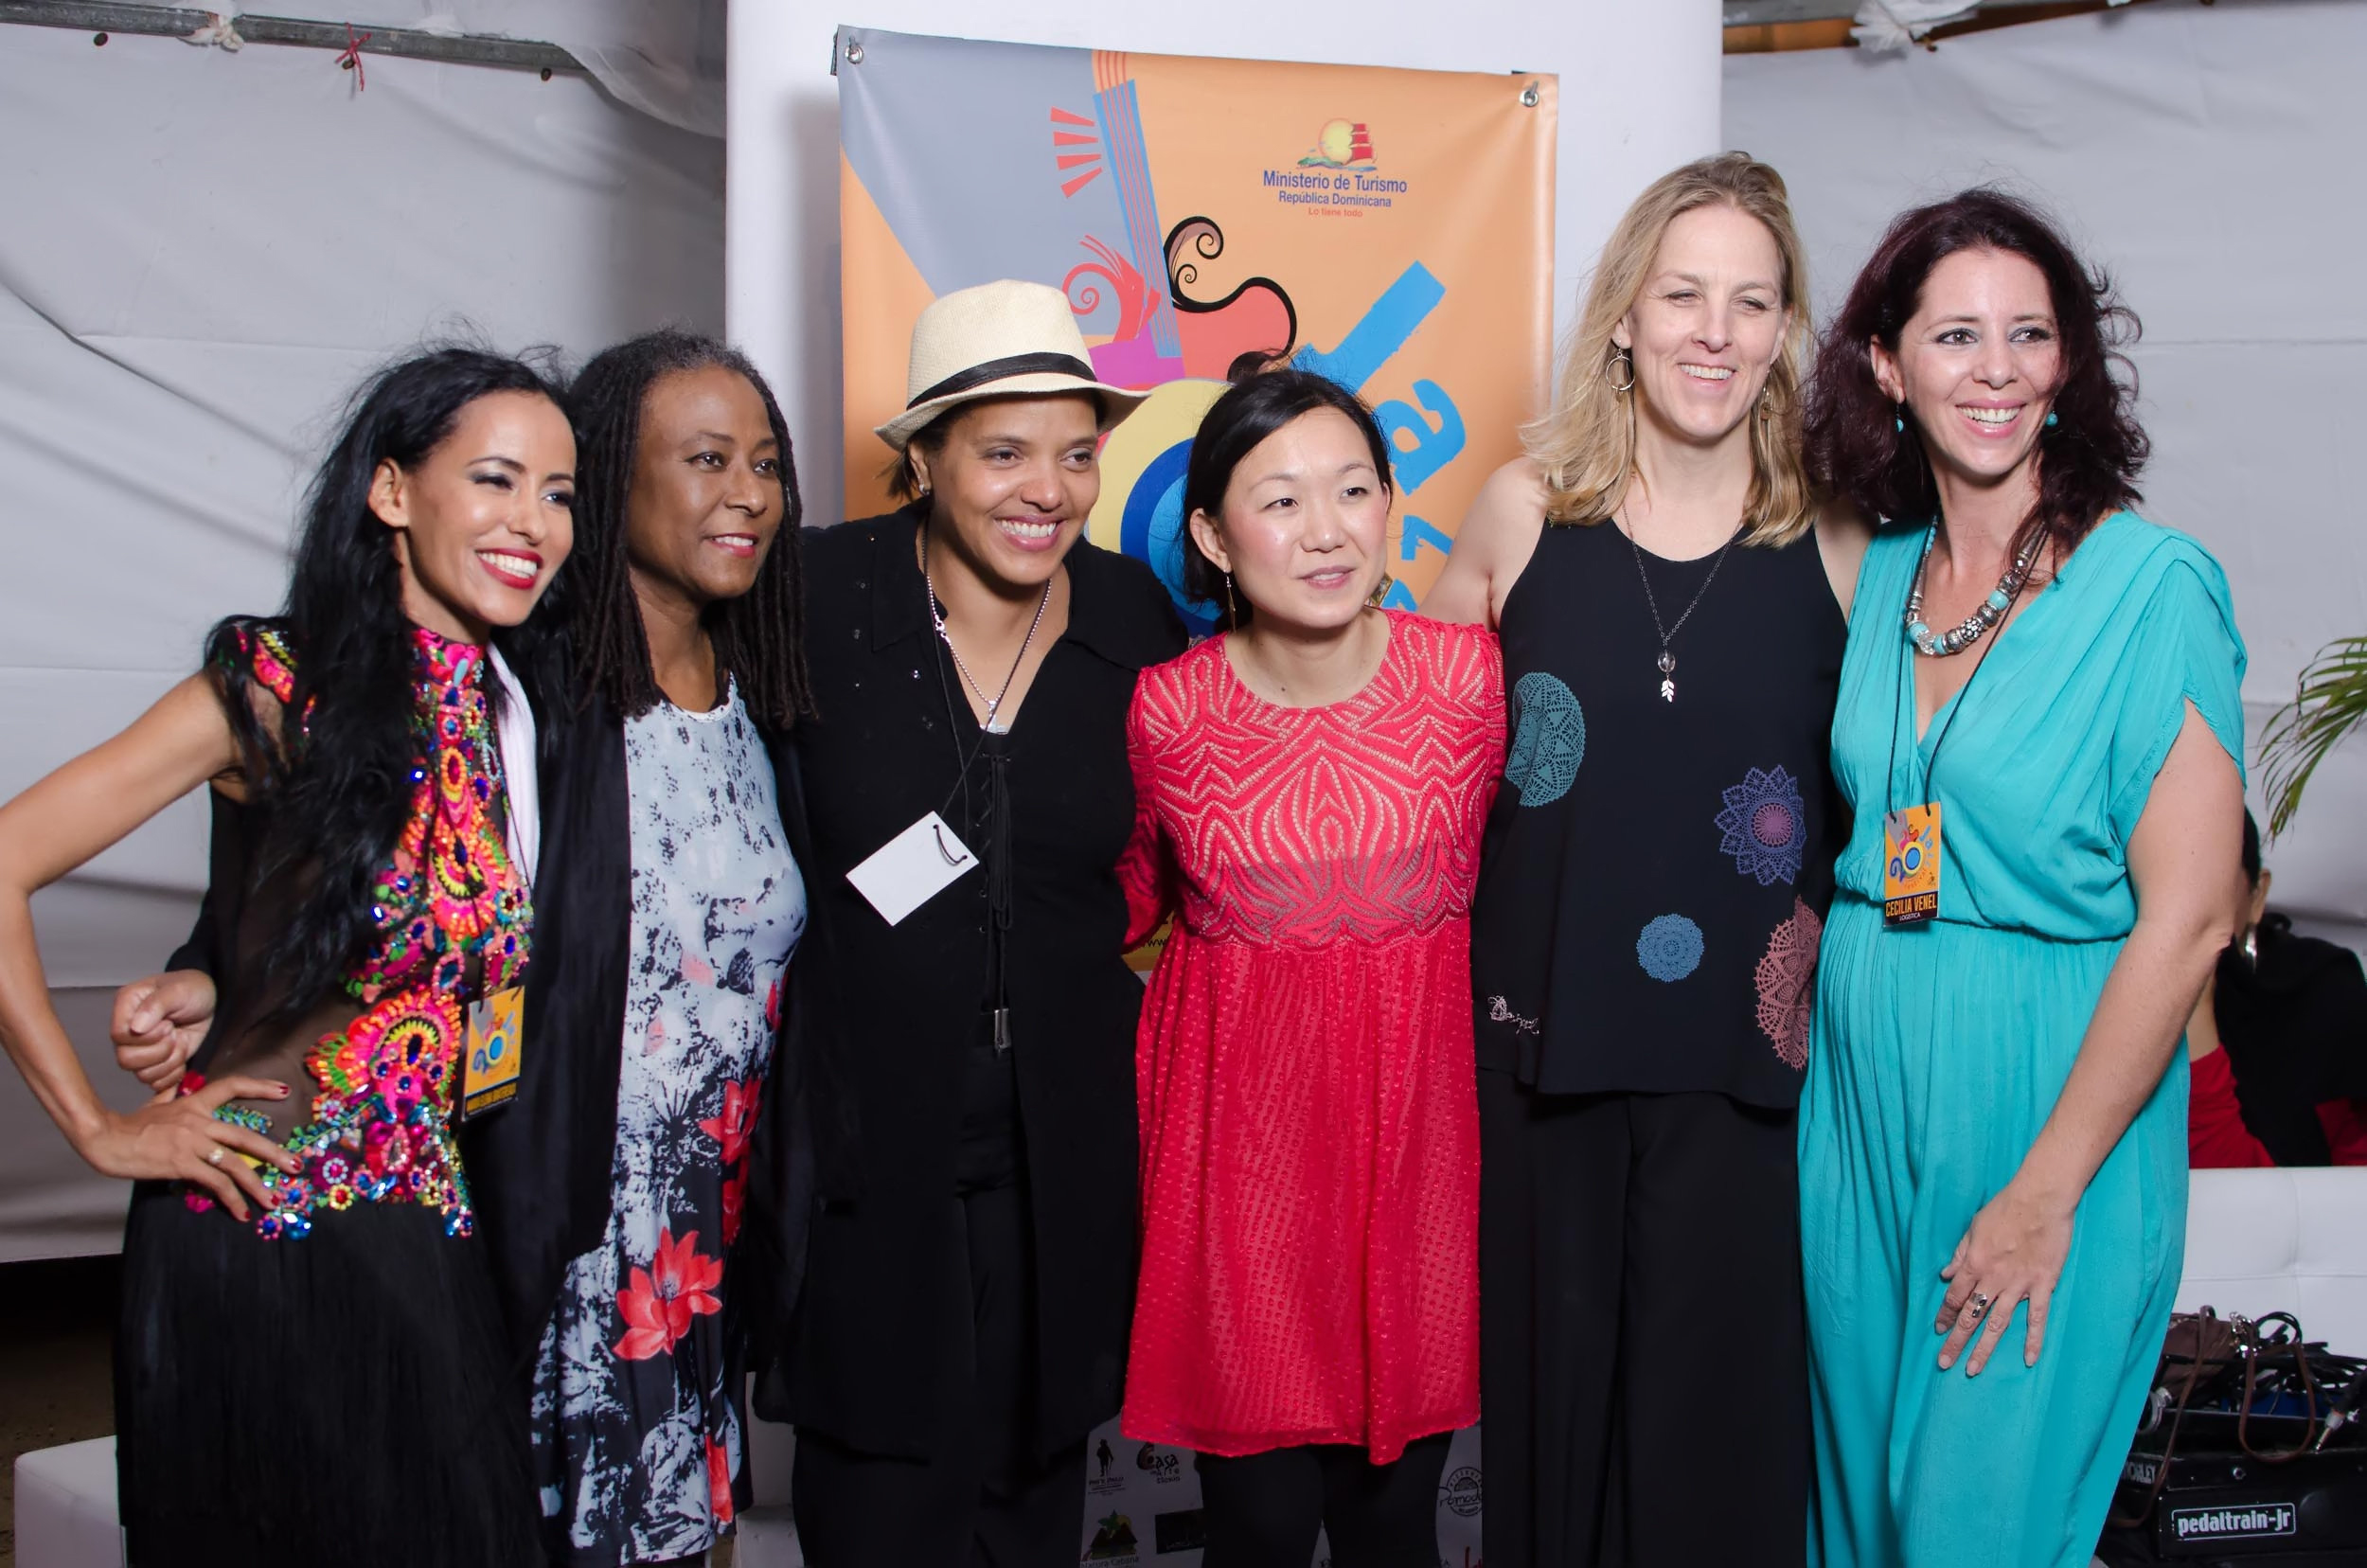 Pictured (from left to right): Maria Elena Gratereaux, Geri Allen,Terri Lynne Carrington, Linda Oh, Ingrid Jensen, and Cecilia Venel. (Photo by Gabriel Rodes) 